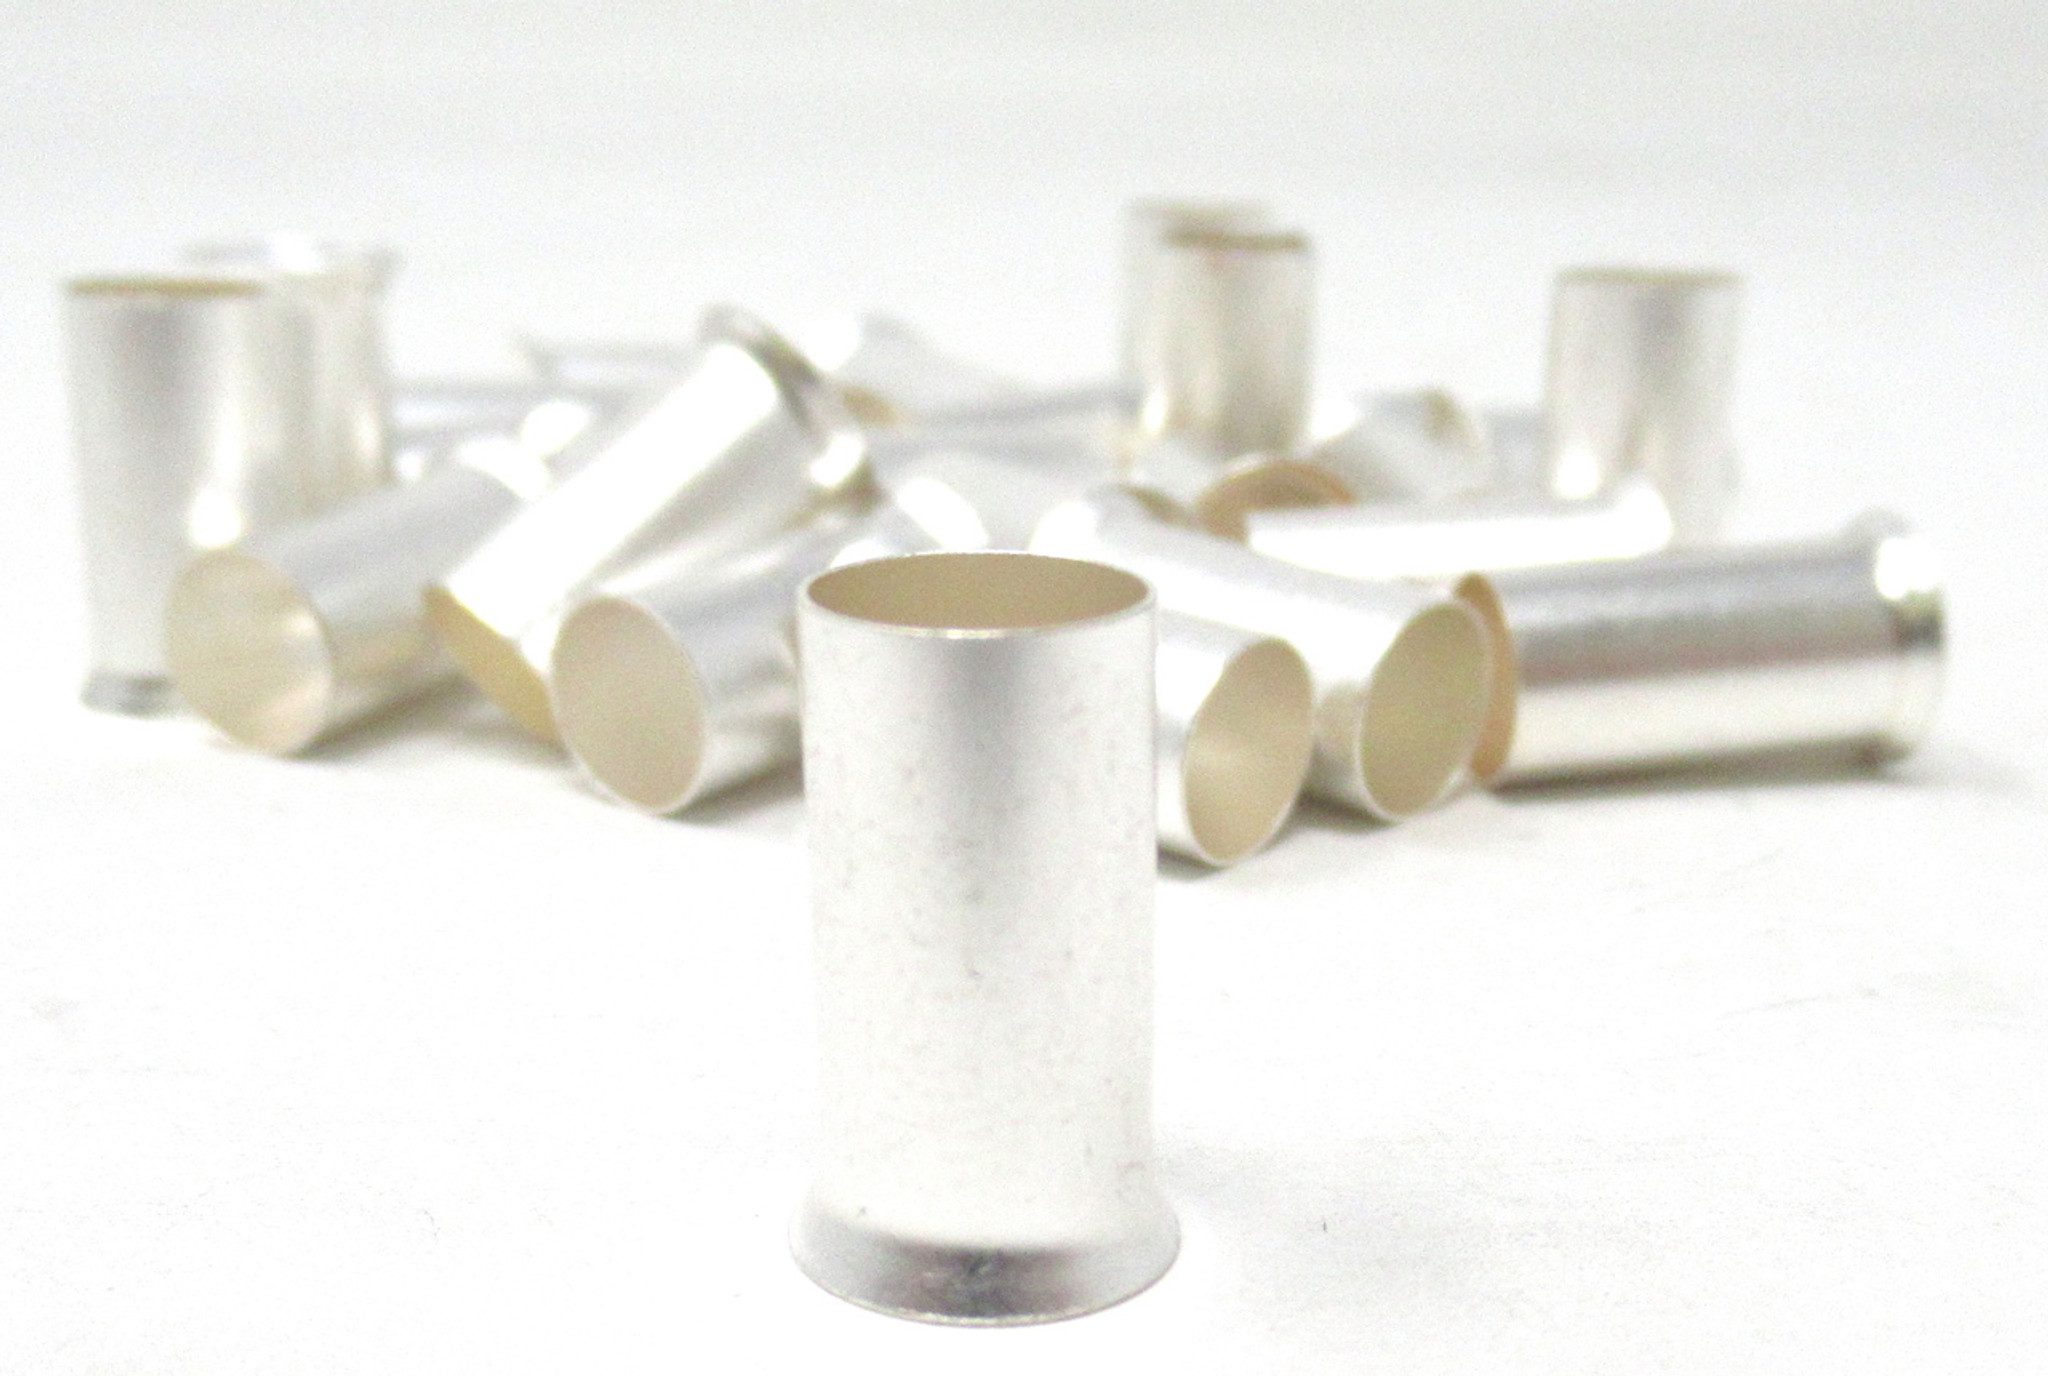 A group of 4 GA Wire Ferrules - Copper Tinned 25pk on a white surface.